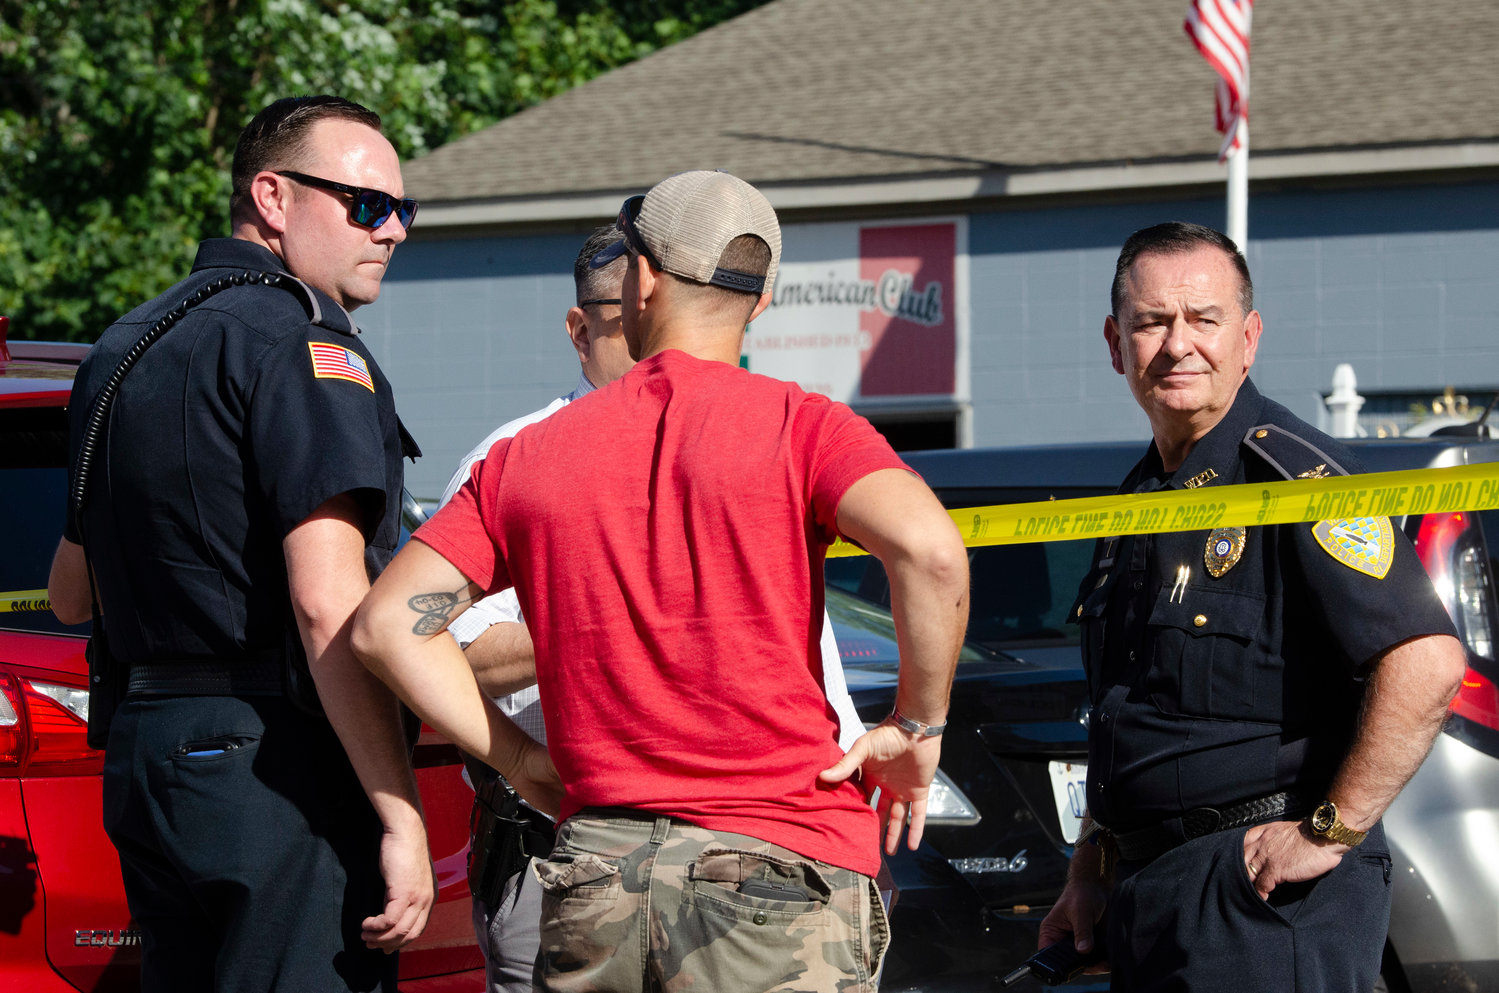 Warren Police Chief Roy Borges (right) and another officer speak with a bystander during an investigation of a shooting at the Italian American Club in Warren on Thursday afternoon.